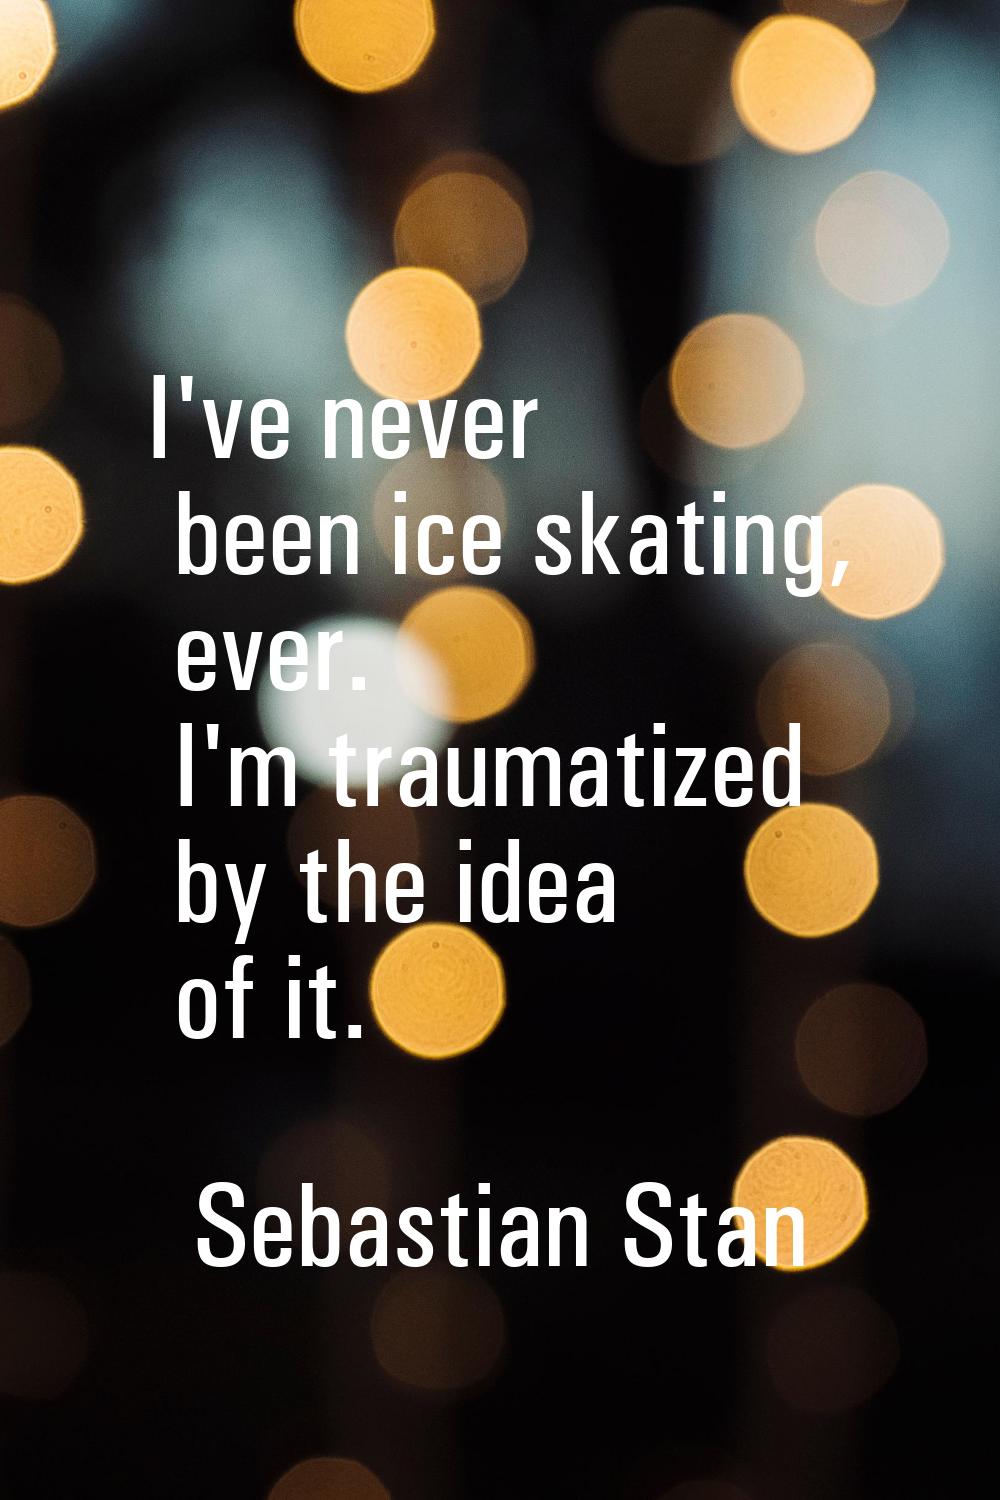 I've never been ice skating, ever. I'm traumatized by the idea of it.